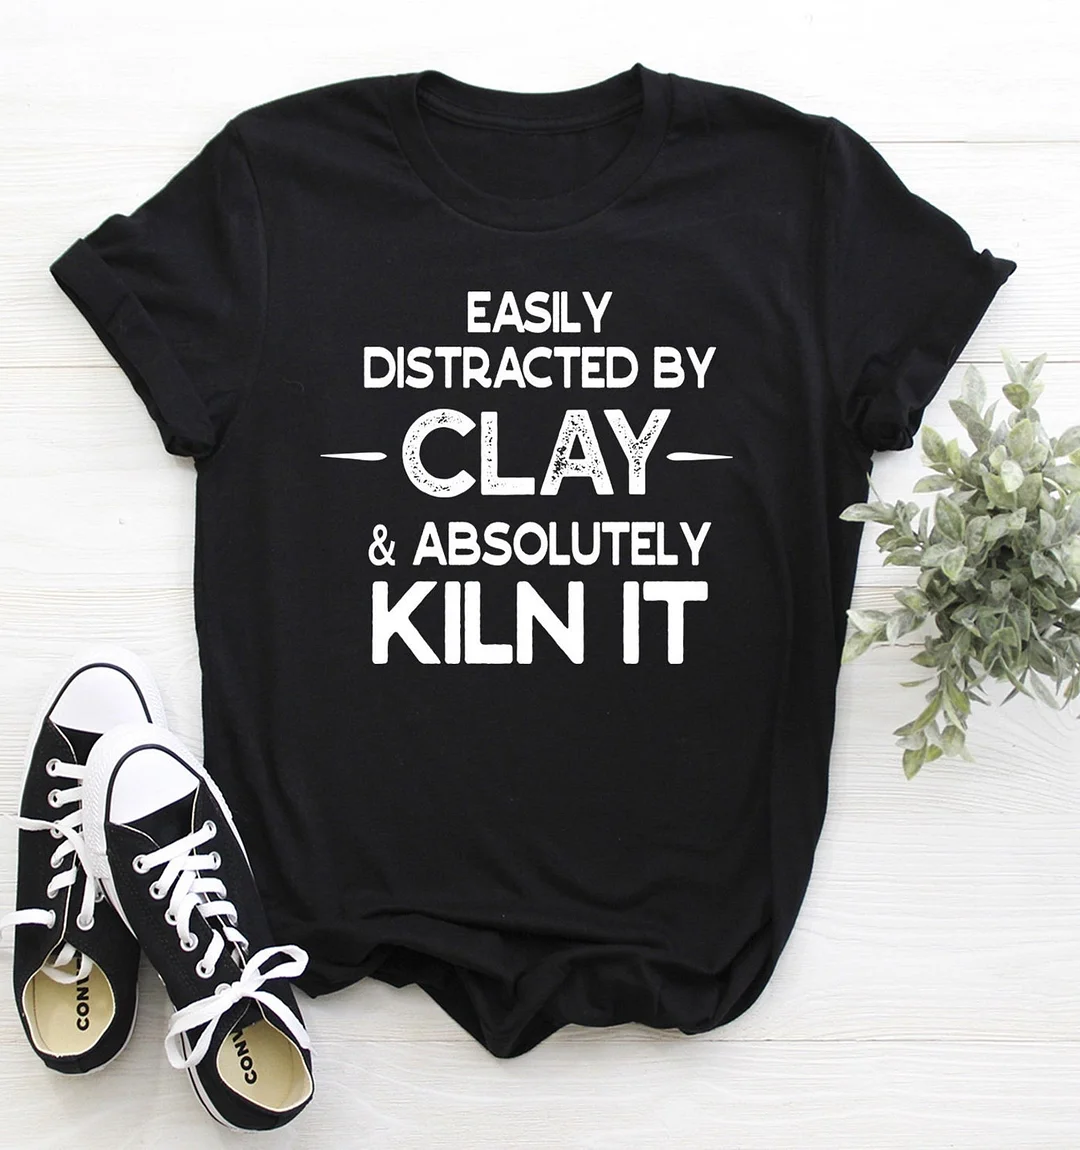 Totally Kiln It Shirt Funny Pottery Ceramics And Gift Teacher Lover For Potter Top Tees